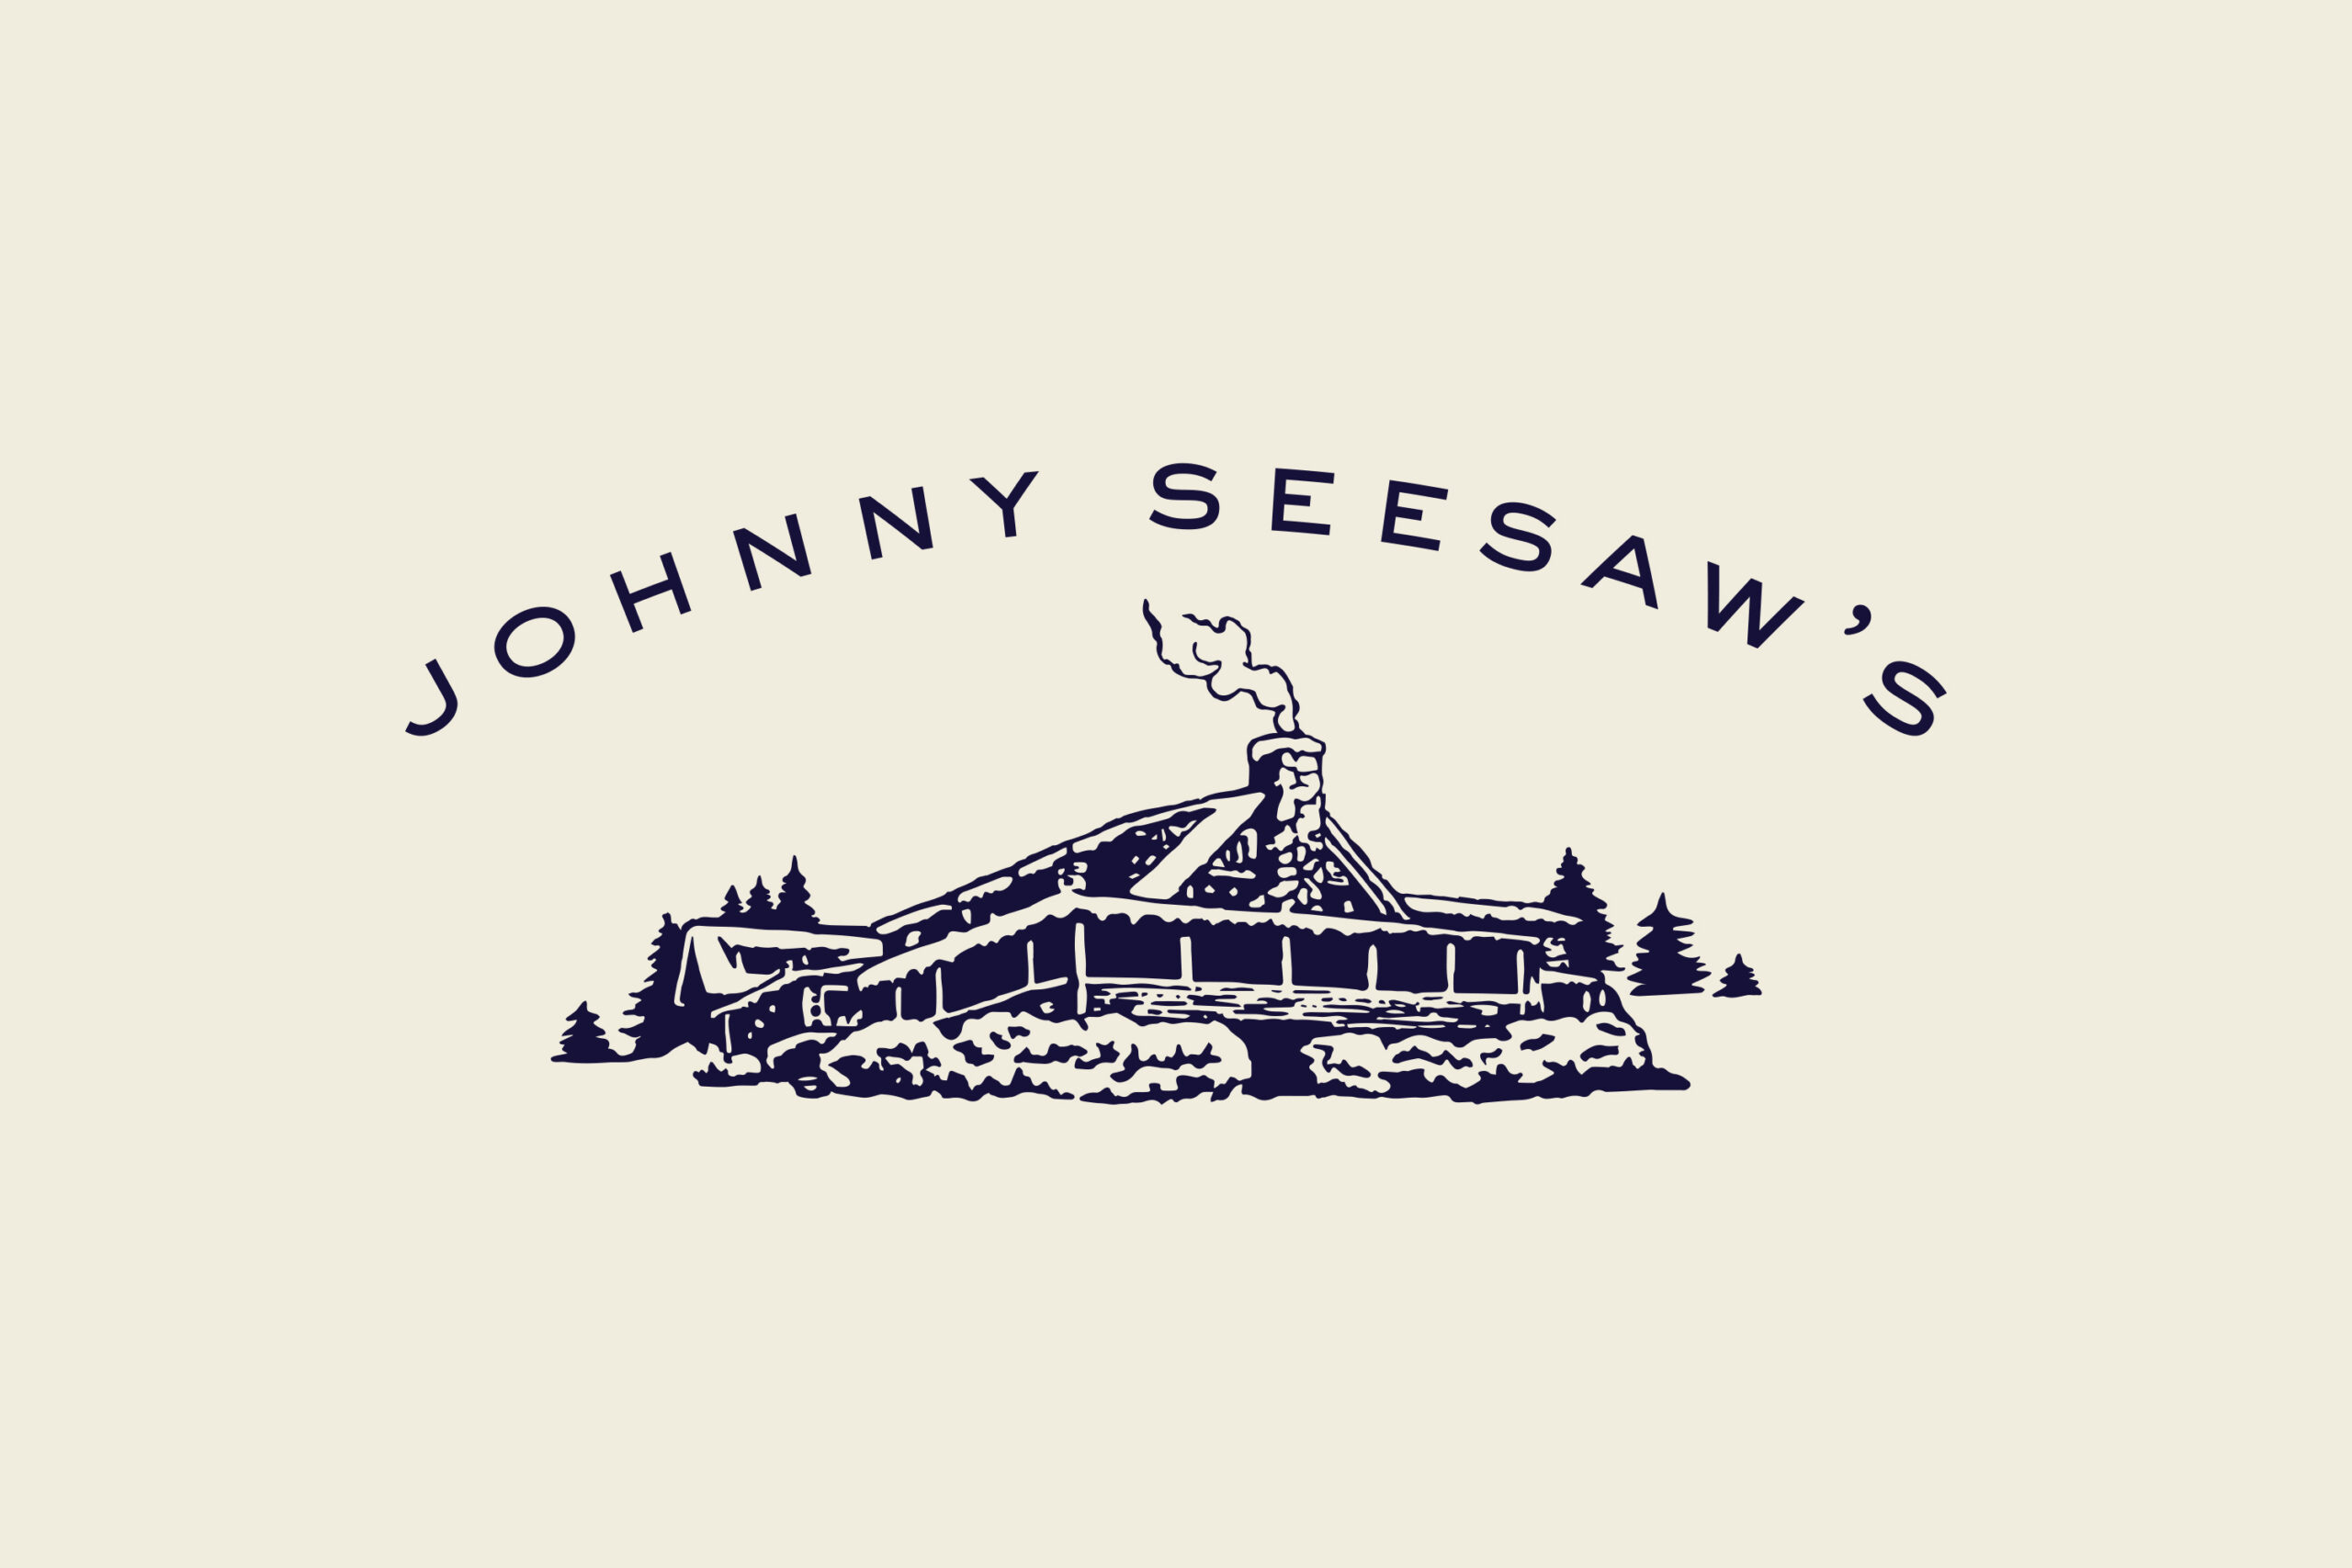 Johnny Seesaw's